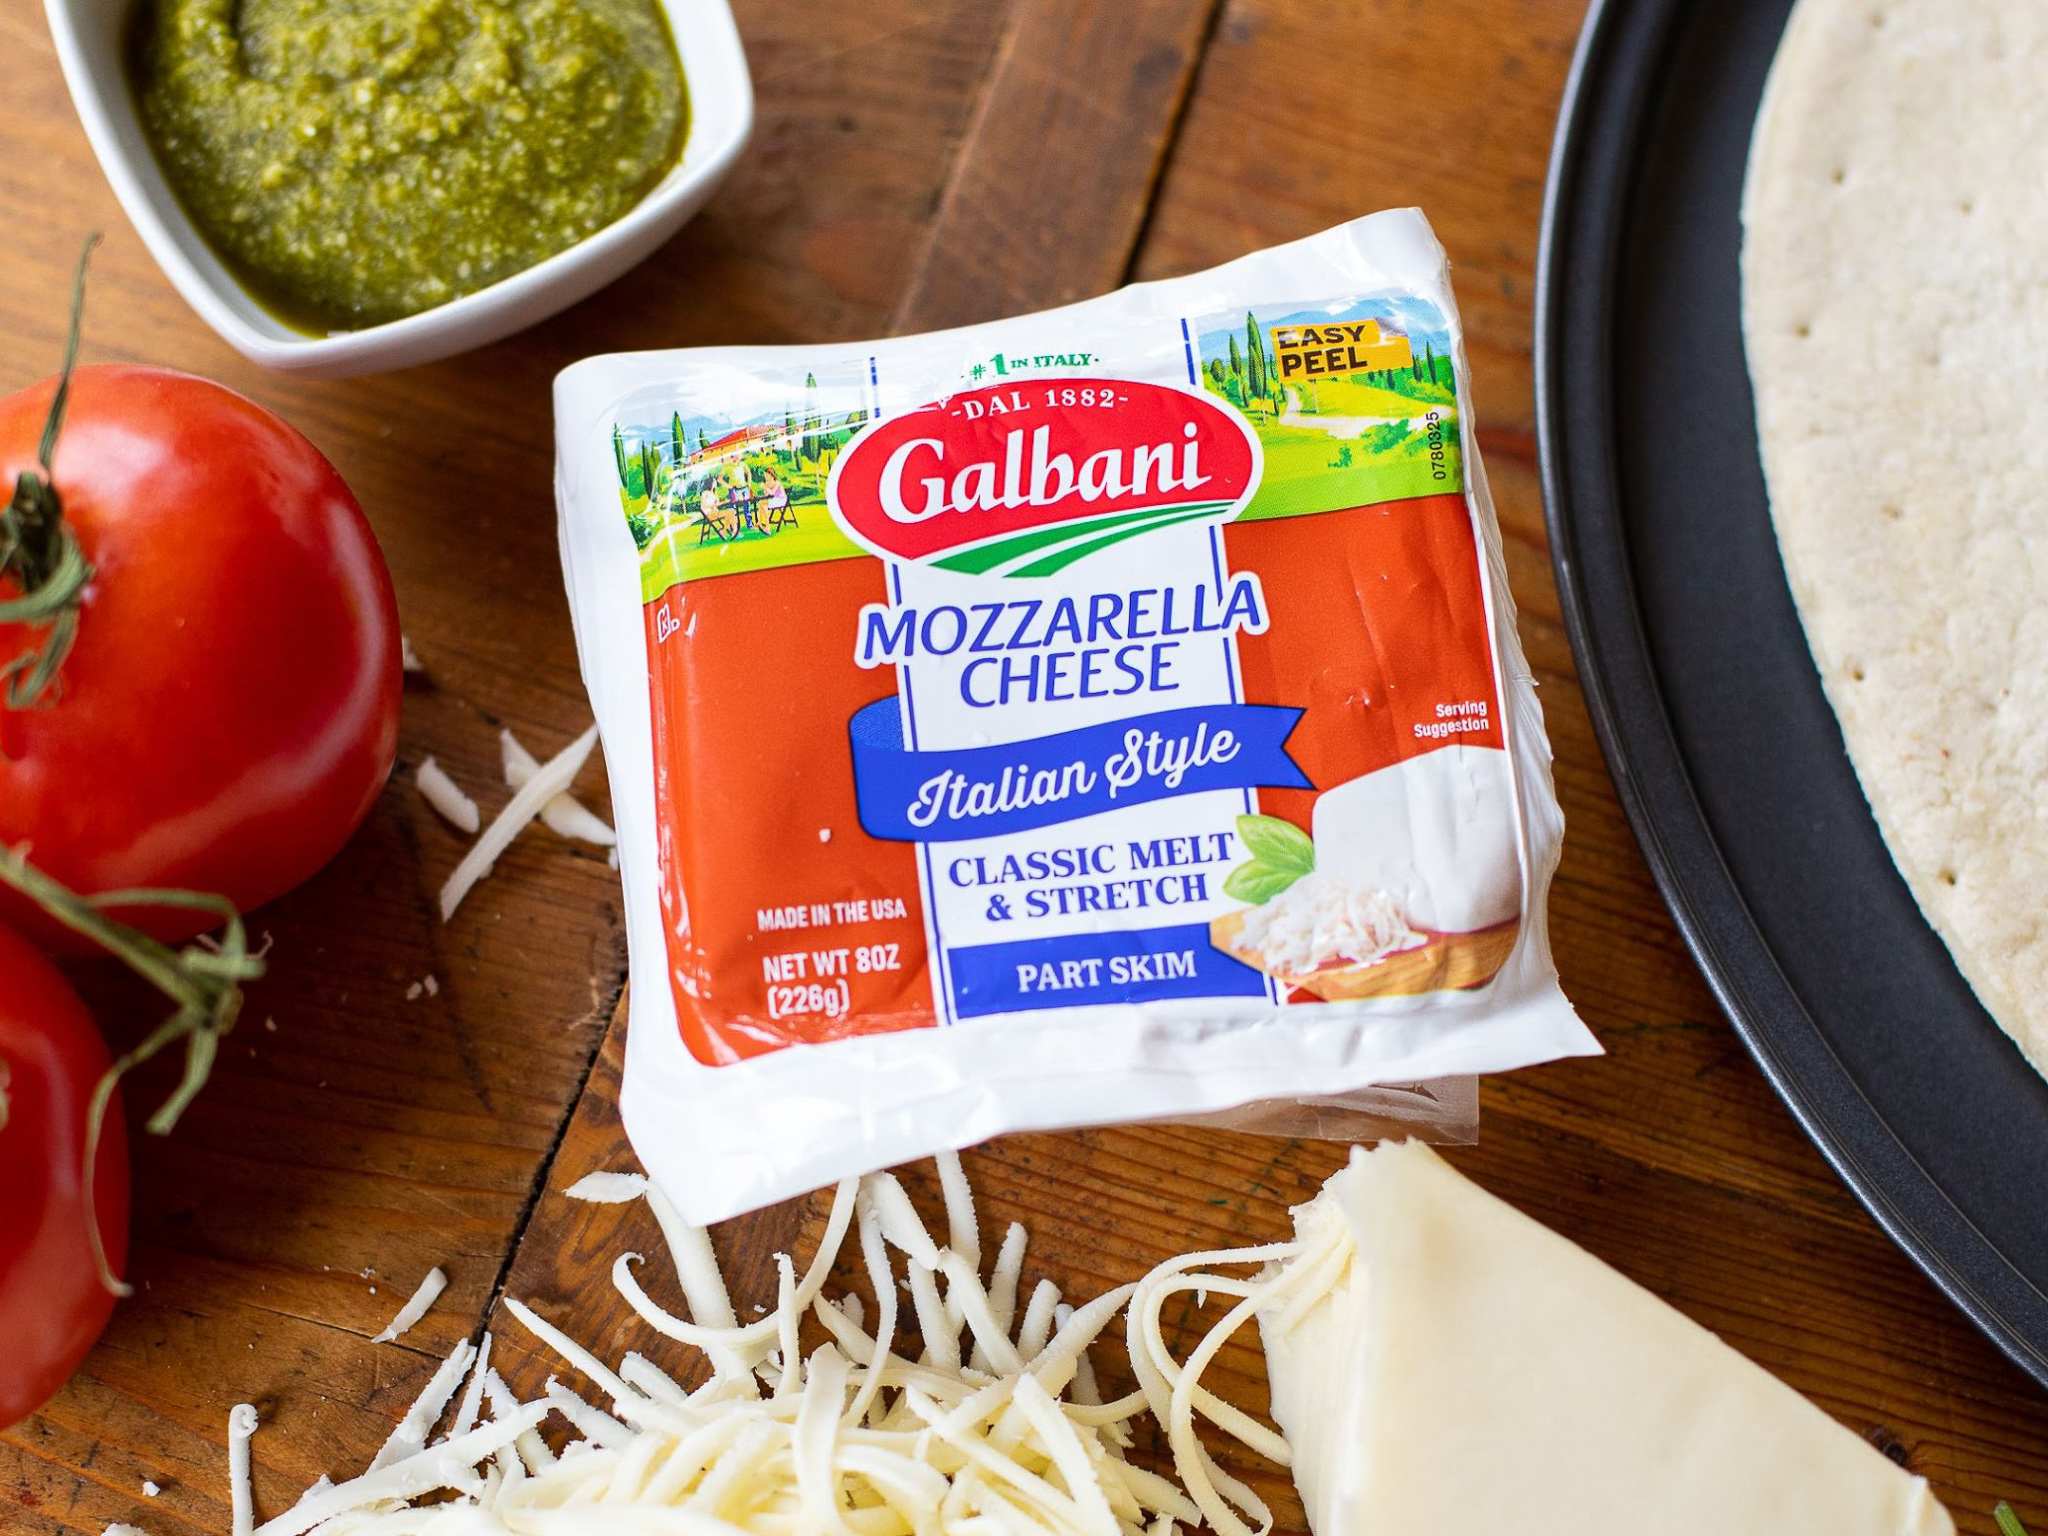 Get Galbani Mozzarella For As Low As 50¢ At Publix